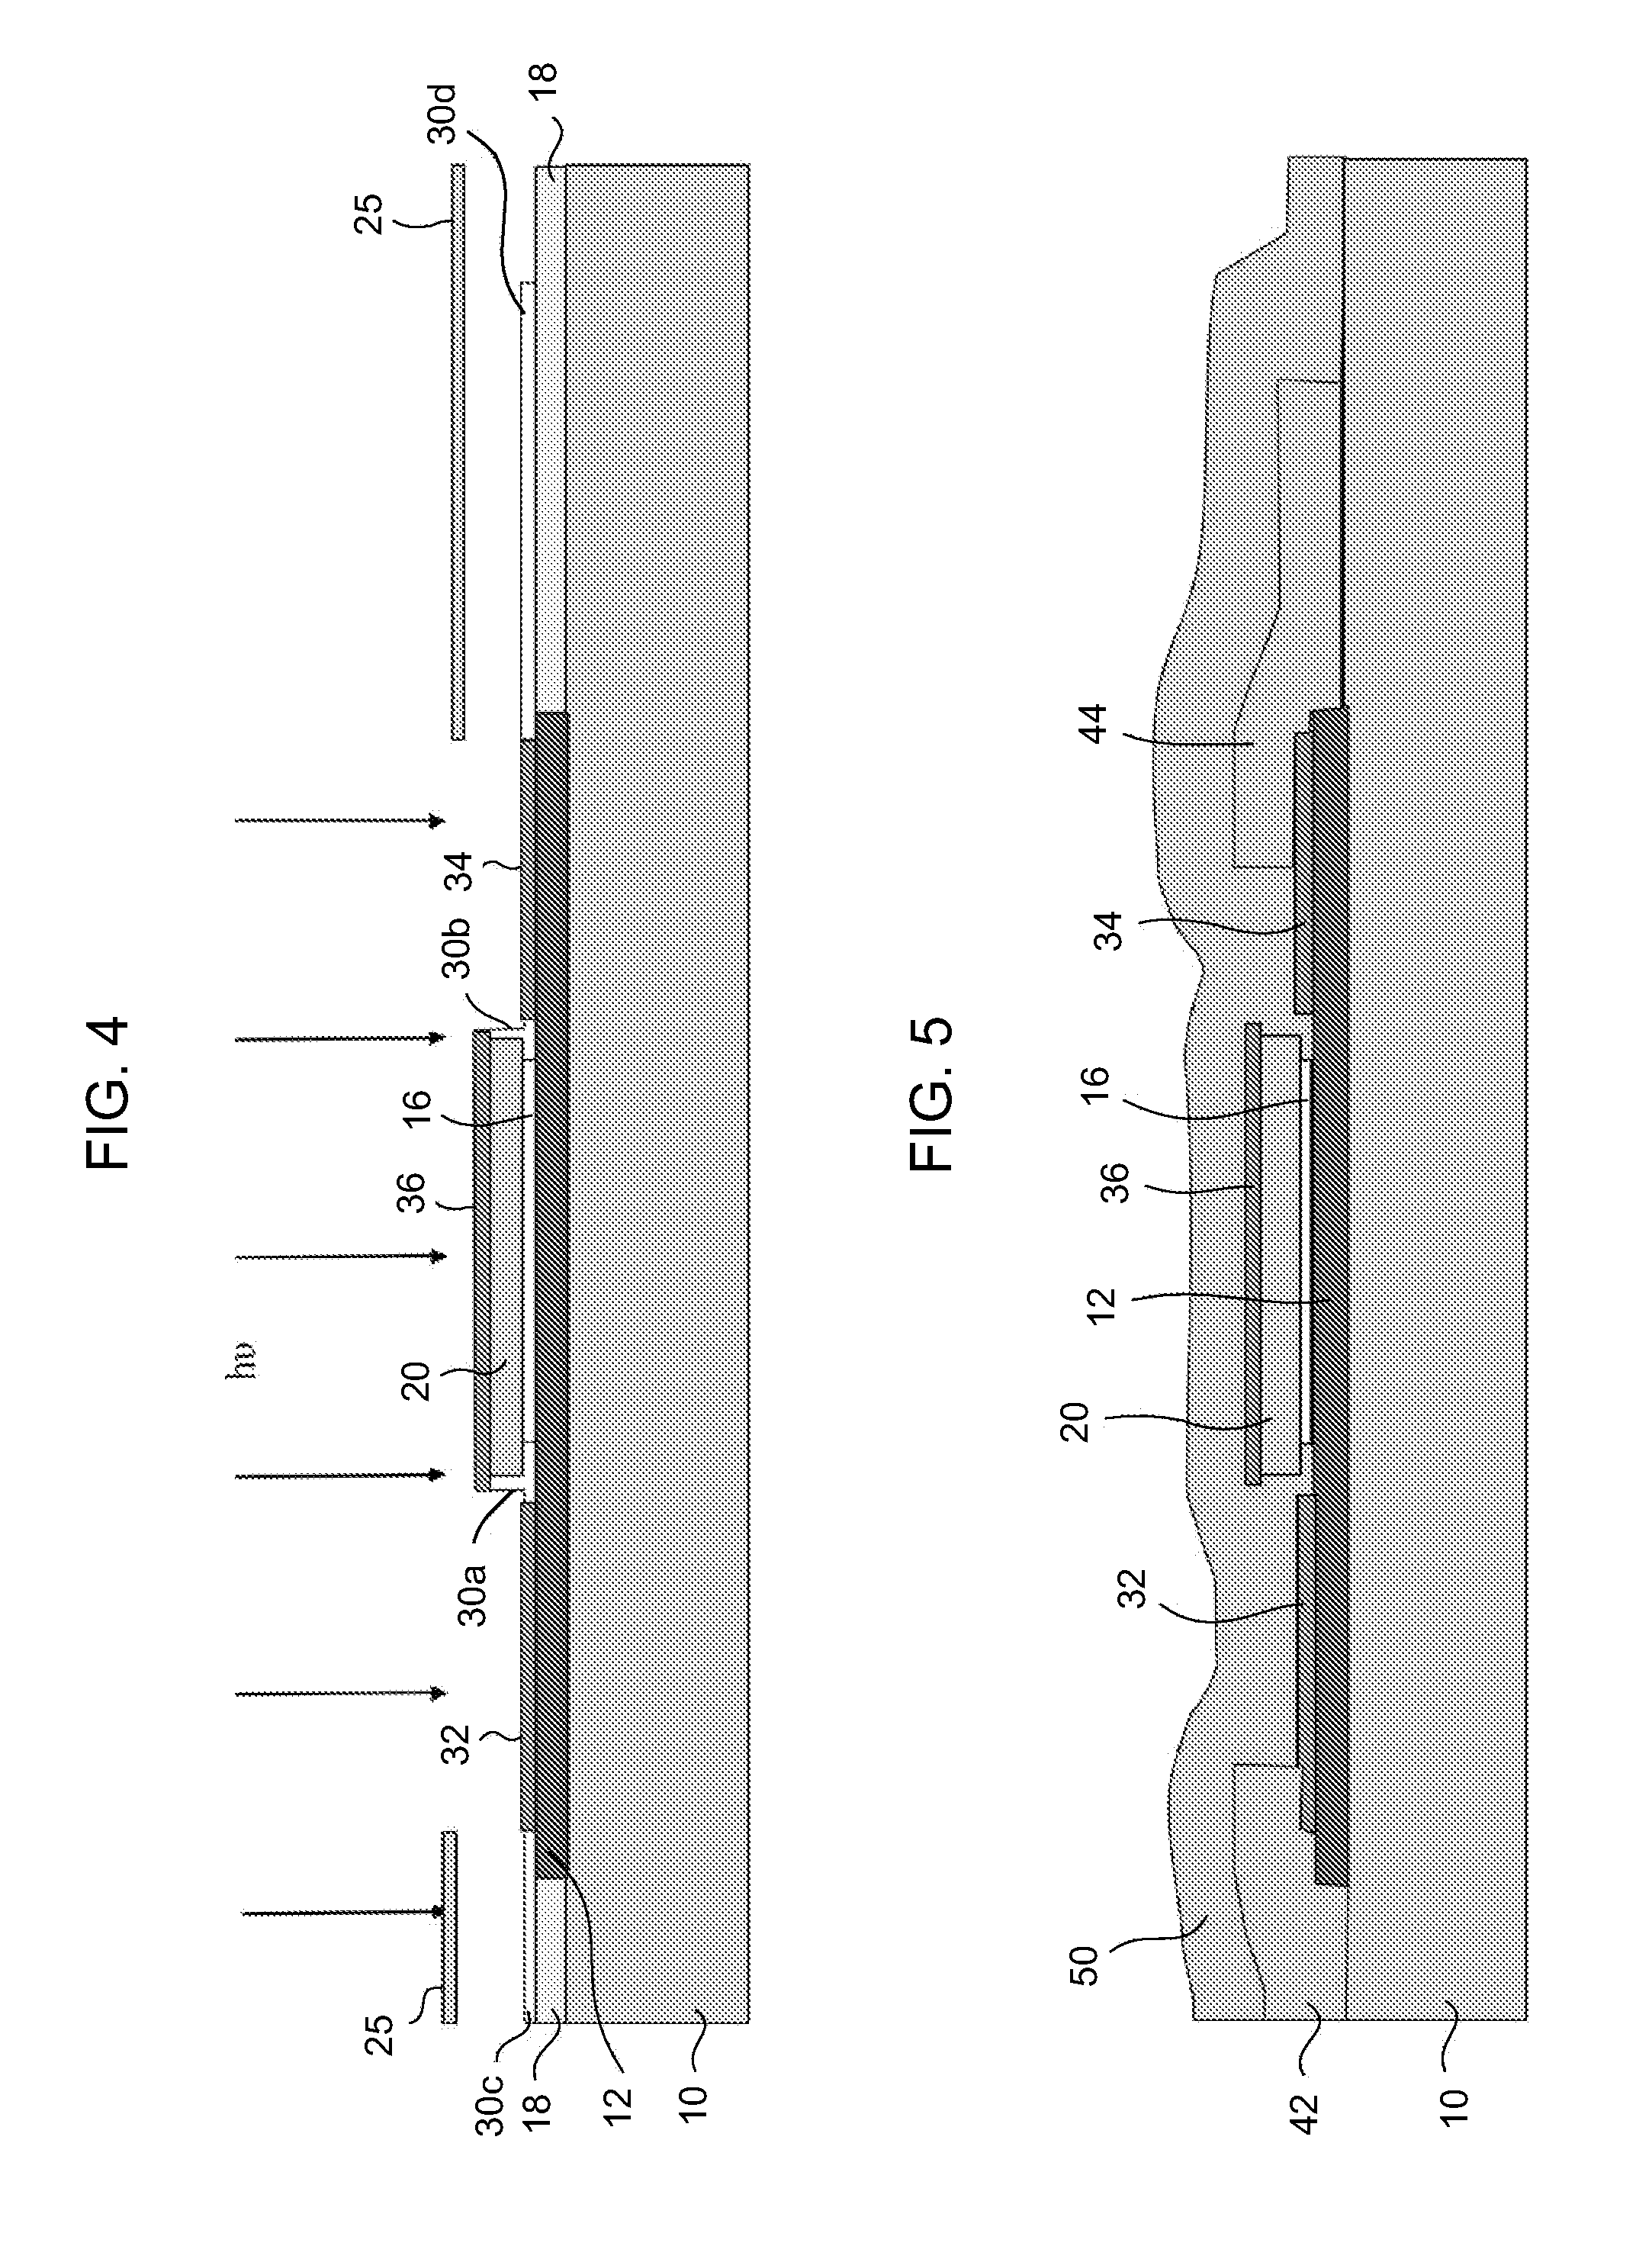 MOS transistor with self-aligned source and drain, and method for making the same